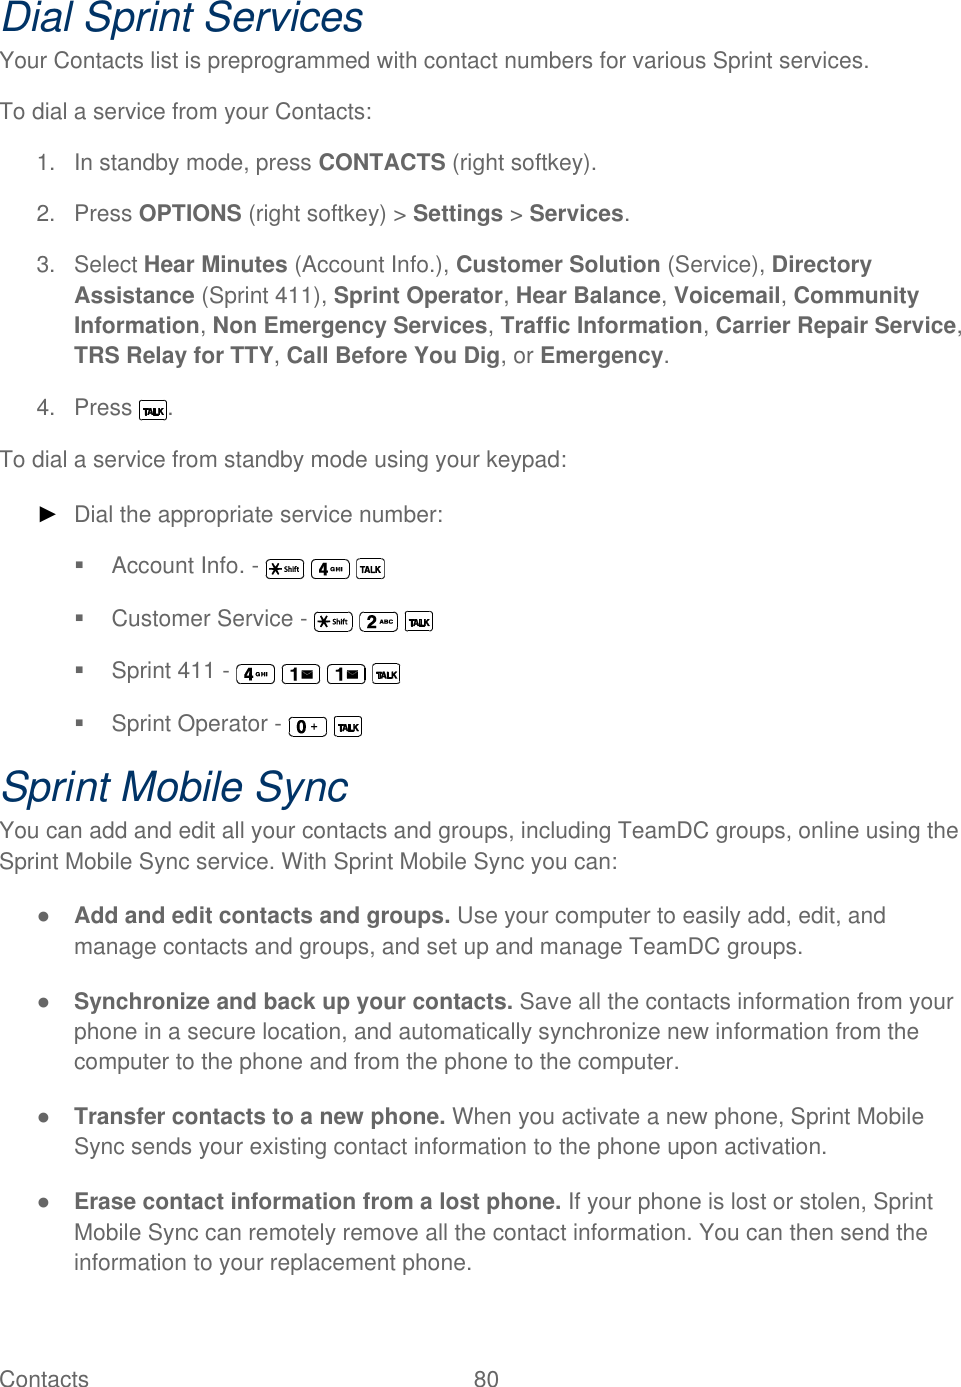  Contacts   80   Dial Sprint Services Your Contacts list is preprogrammed with contact numbers for various Sprint services. To dial a service from your Contacts: 1.  In standby mode, press CONTACTS (right softkey). 2.  Press OPTIONS (right softkey) &gt; Settings &gt; Services. 3.  Select Hear Minutes (Account Info.), Customer Solution (Service), Directory Assistance (Sprint 411), Sprint Operator, Hear Balance, Voicemail, Community Information, Non Emergency Services, Traffic Information, Carrier Repair Service, TRS Relay for TTY, Call Before You Dig, or Emergency. 4.  Press  . To dial a service from standby mode using your keypad: ► Dial the appropriate service number:   Account Info. -         Customer Service -         Sprint 411 -           Sprint Operator -     Sprint Mobile Sync You can add and edit all your contacts and groups, including TeamDC groups, online using the Sprint Mobile Sync service. With Sprint Mobile Sync you can: ● Add and edit contacts and groups. Use your computer to easily add, edit, and manage contacts and groups, and set up and manage TeamDC groups. ● Synchronize and back up your contacts. Save all the contacts information from your phone in a secure location, and automatically synchronize new information from the computer to the phone and from the phone to the computer. ● Transfer contacts to a new phone. When you activate a new phone, Sprint Mobile Sync sends your existing contact information to the phone upon activation. ● Erase contact information from a lost phone. If your phone is lost or stolen, Sprint Mobile Sync can remotely remove all the contact information. You can then send the information to your replacement phone. 